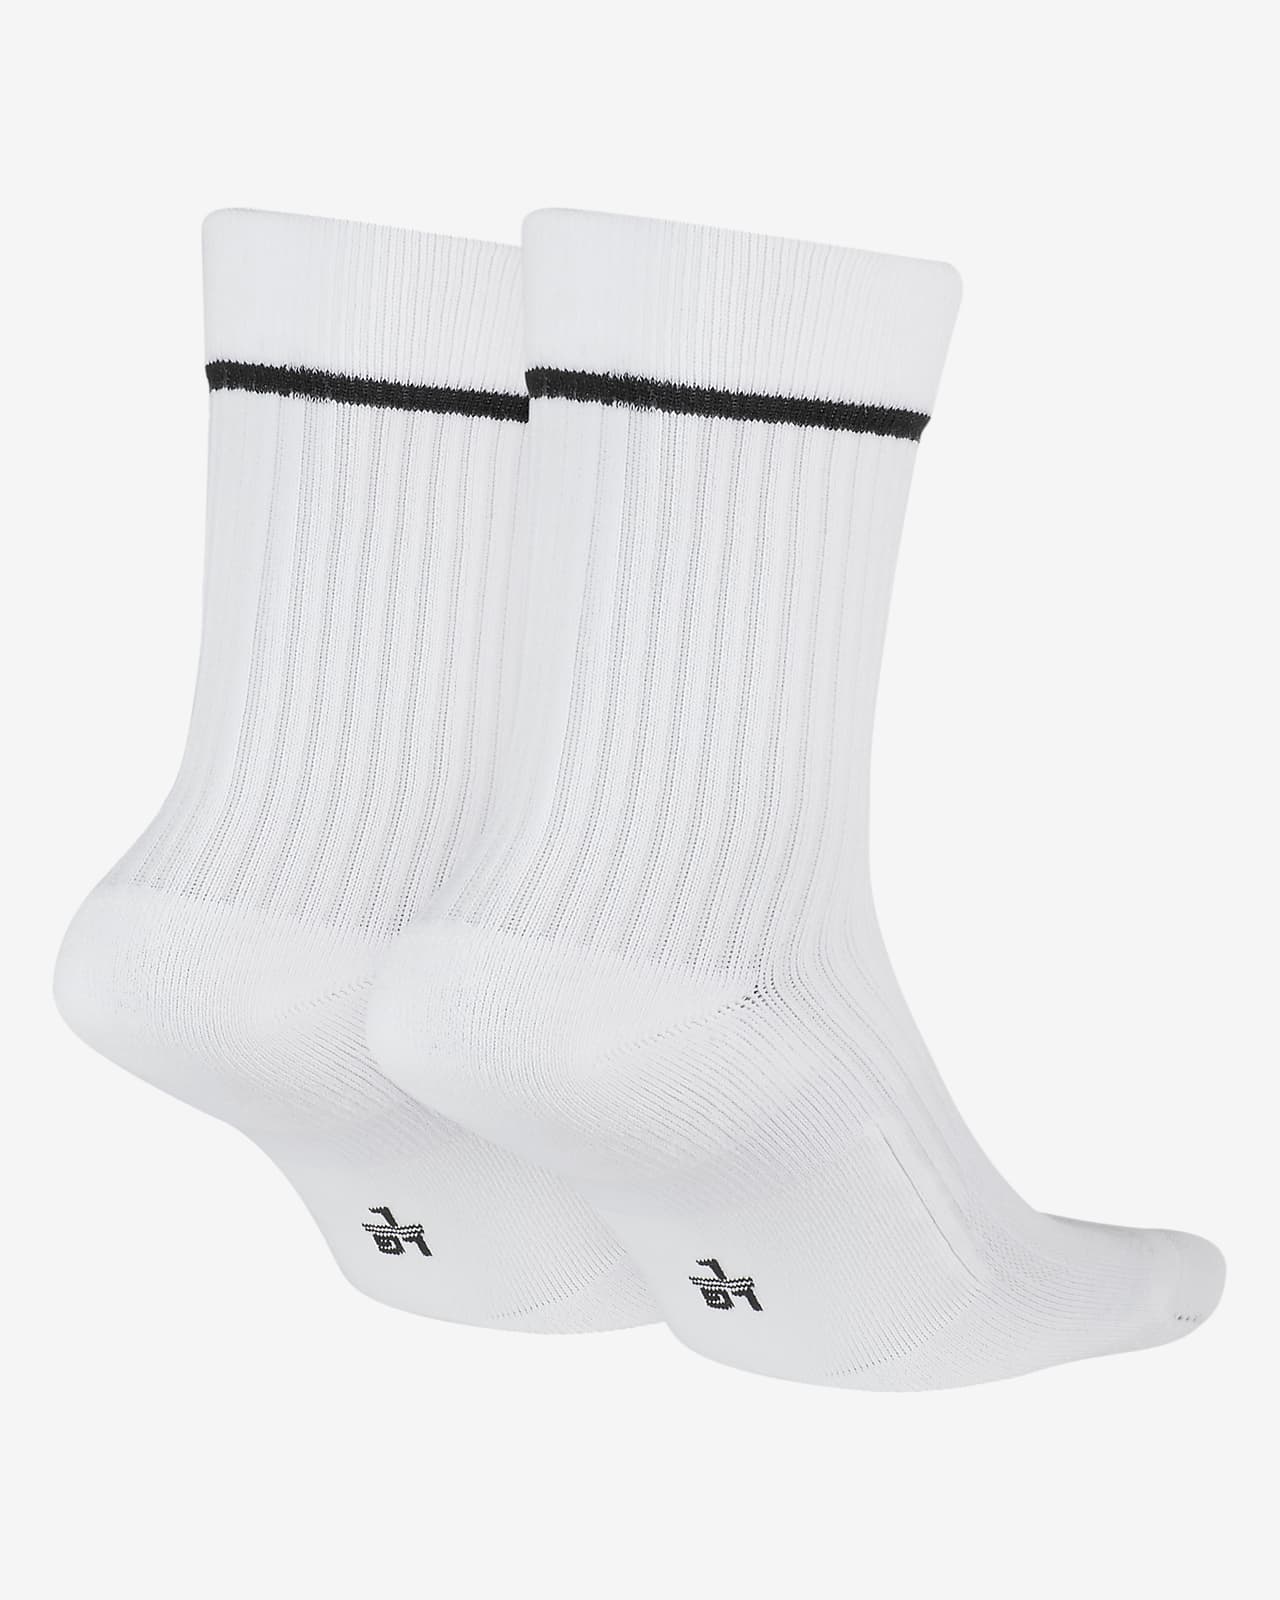 nike snkr sox essential ankle